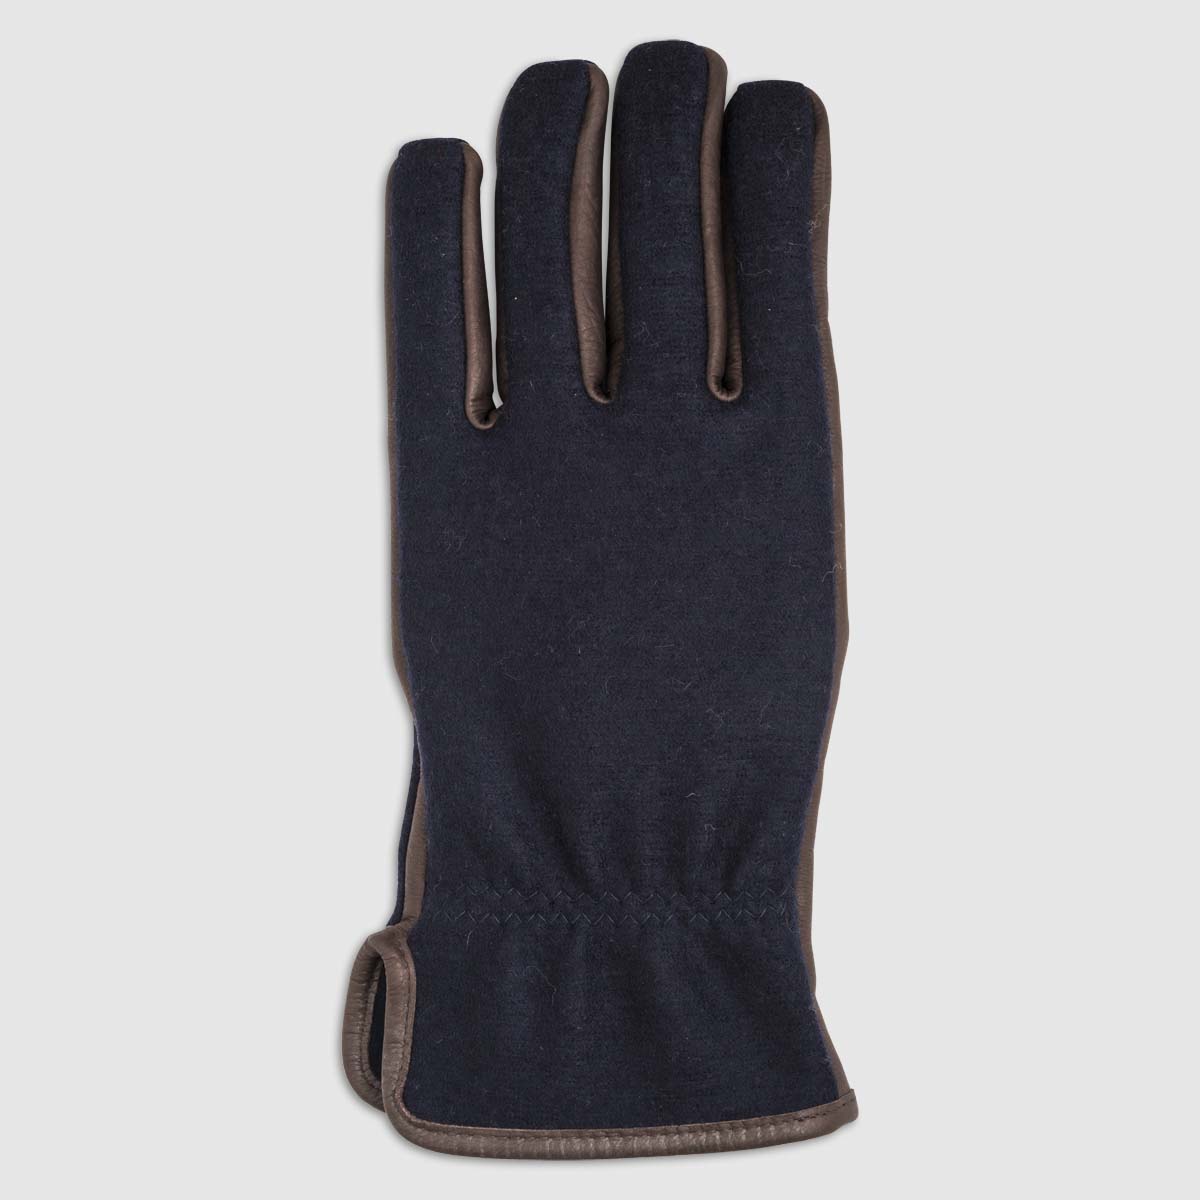 Wool Glove with Leather Details in Blue – XL